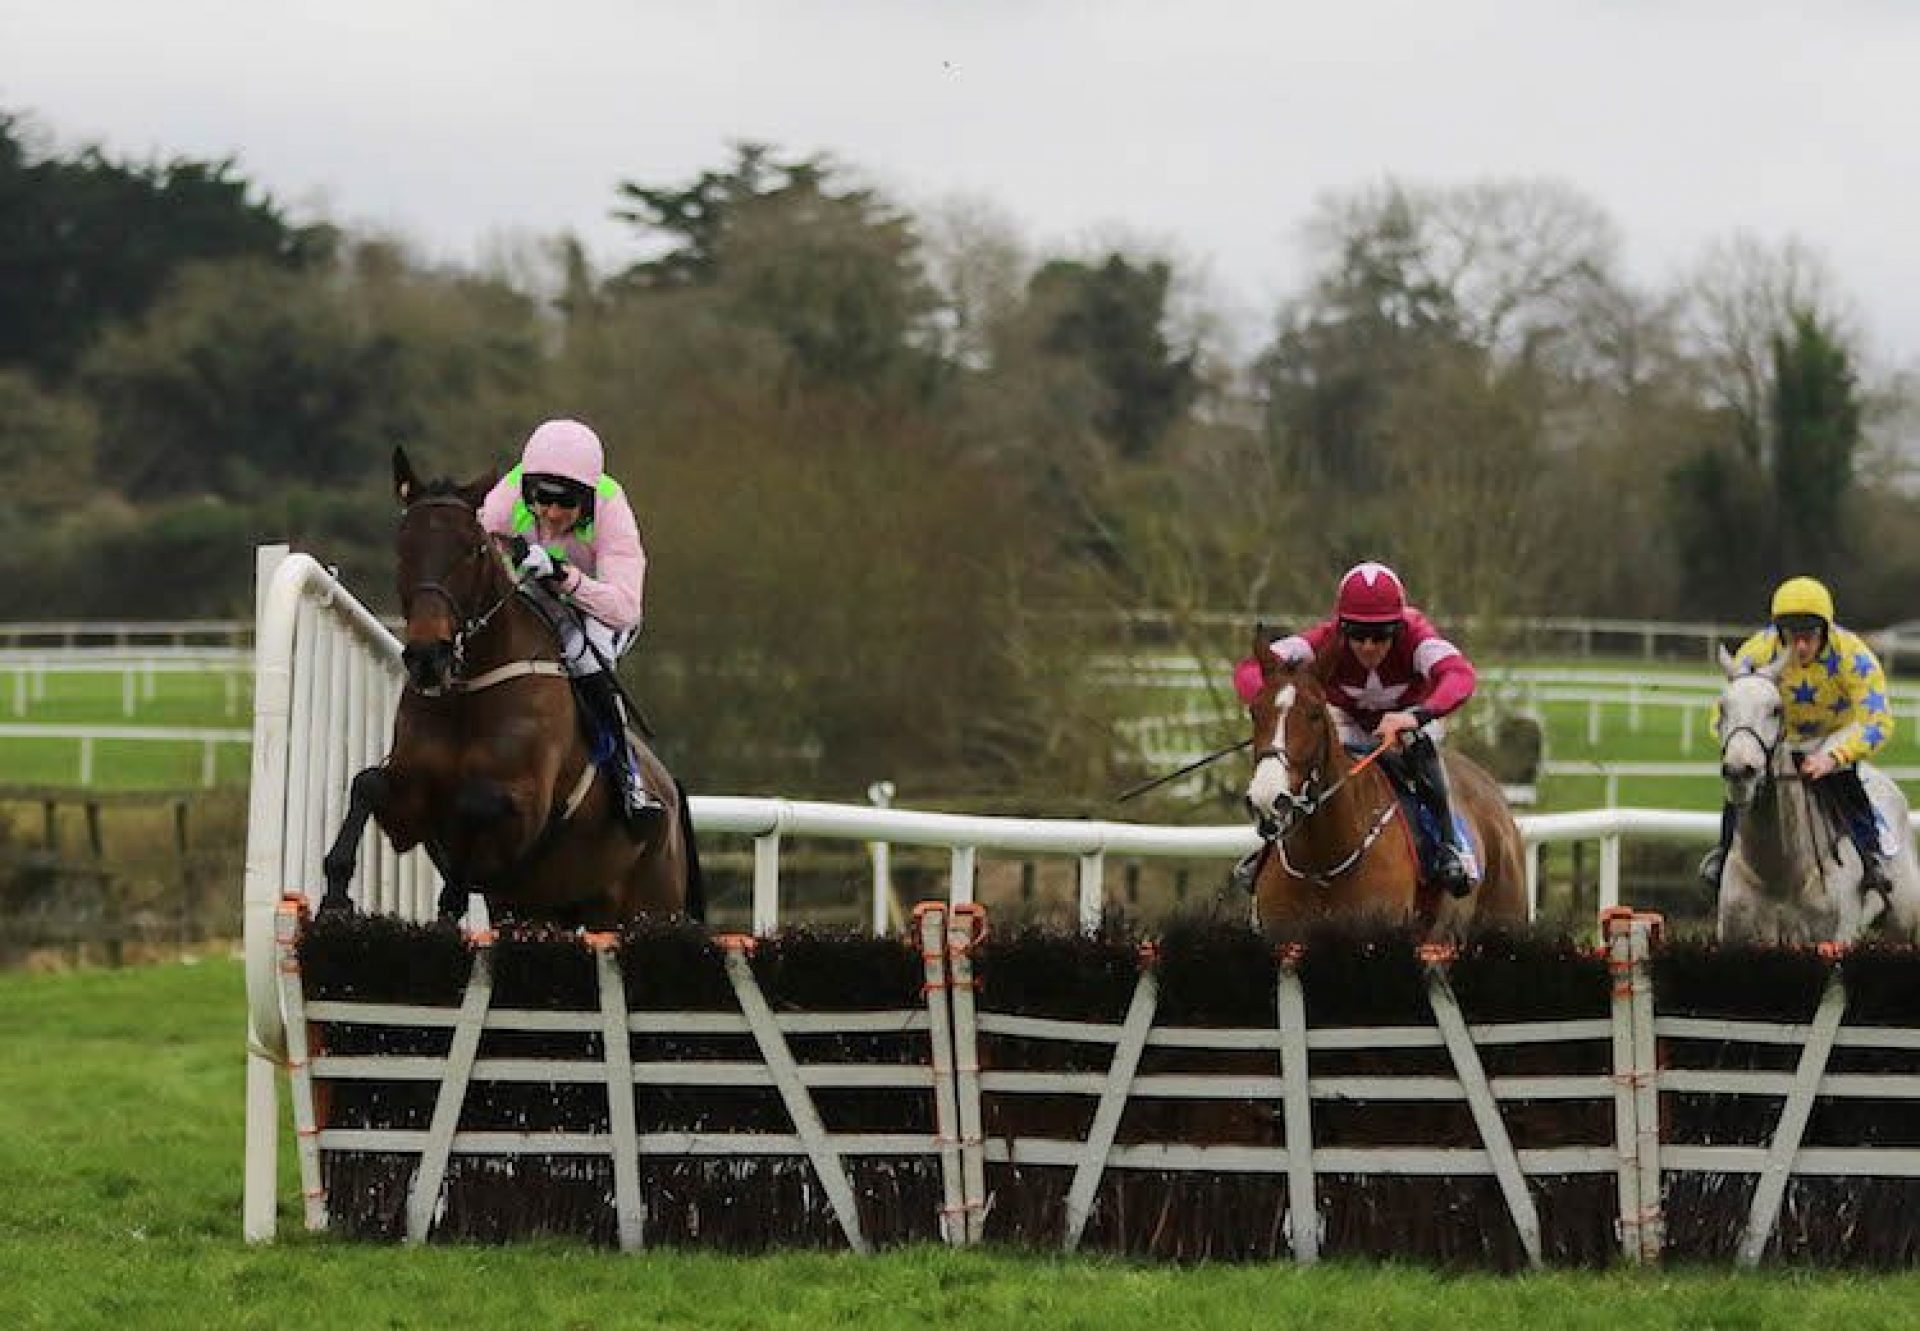 Getabird (Getaway) winning the G2 Moscow Flyer Novice Hurdle at Punchestown